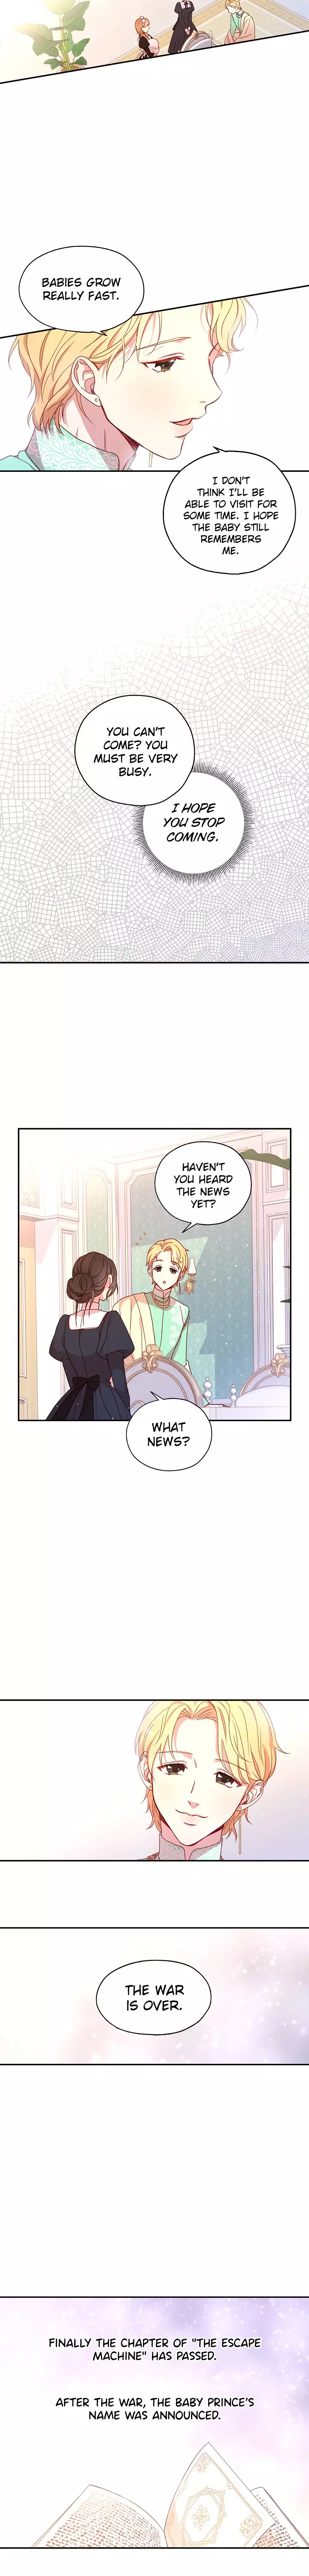 Surviving As A Maid - 10 page 2